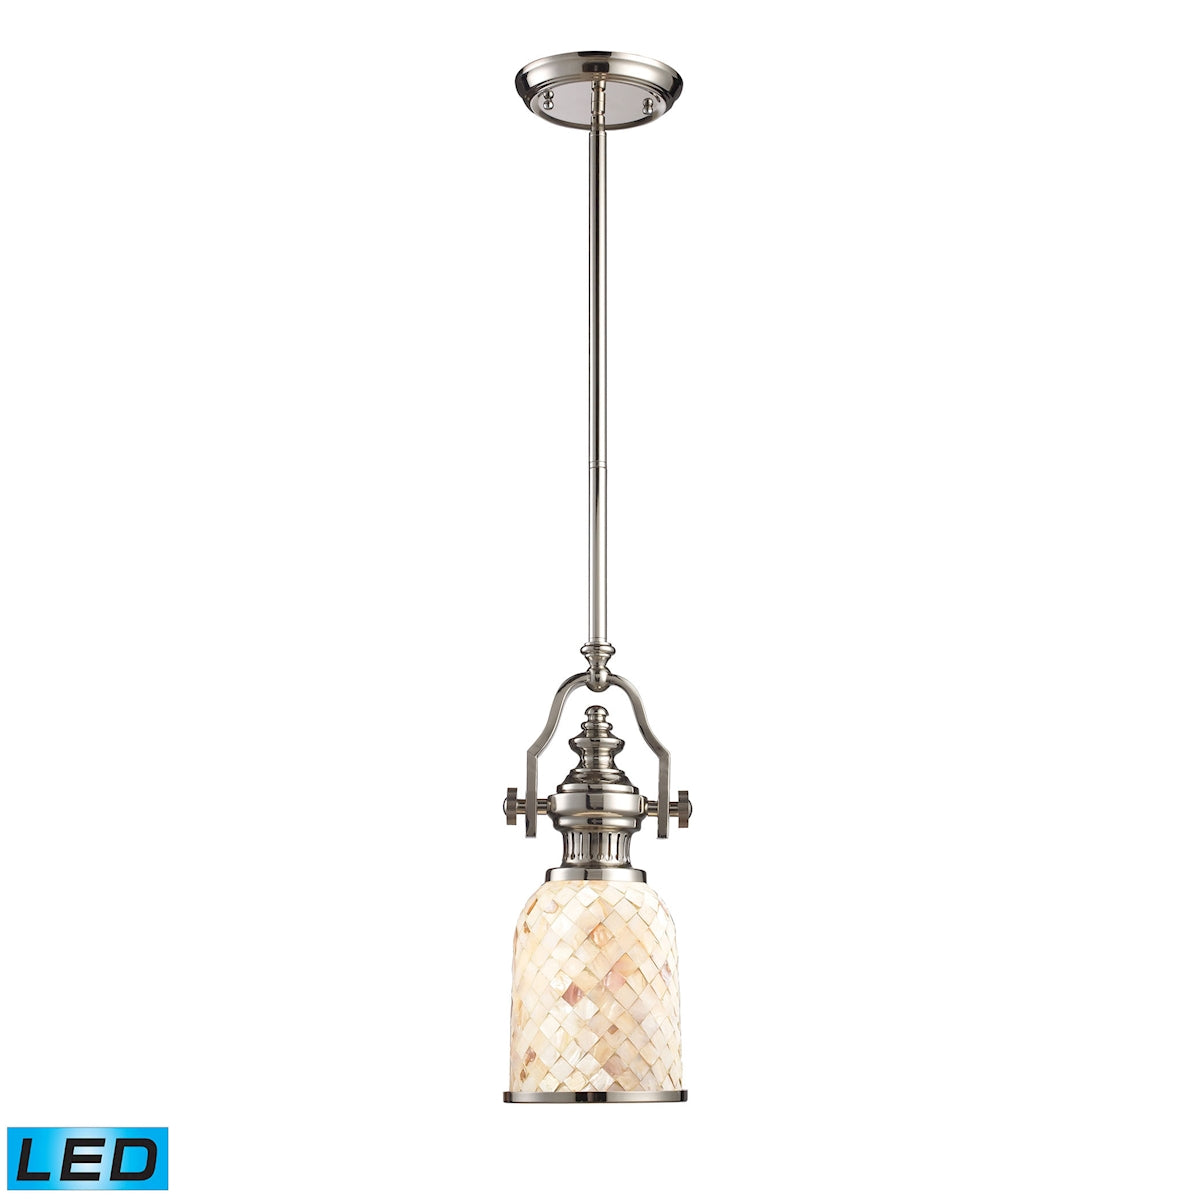 ELK Lighting 66412-1-LED Chadwick 1-Light Mini Pendant in Polished Nickel with Cappa Shell Shade - Includes LED Bulb